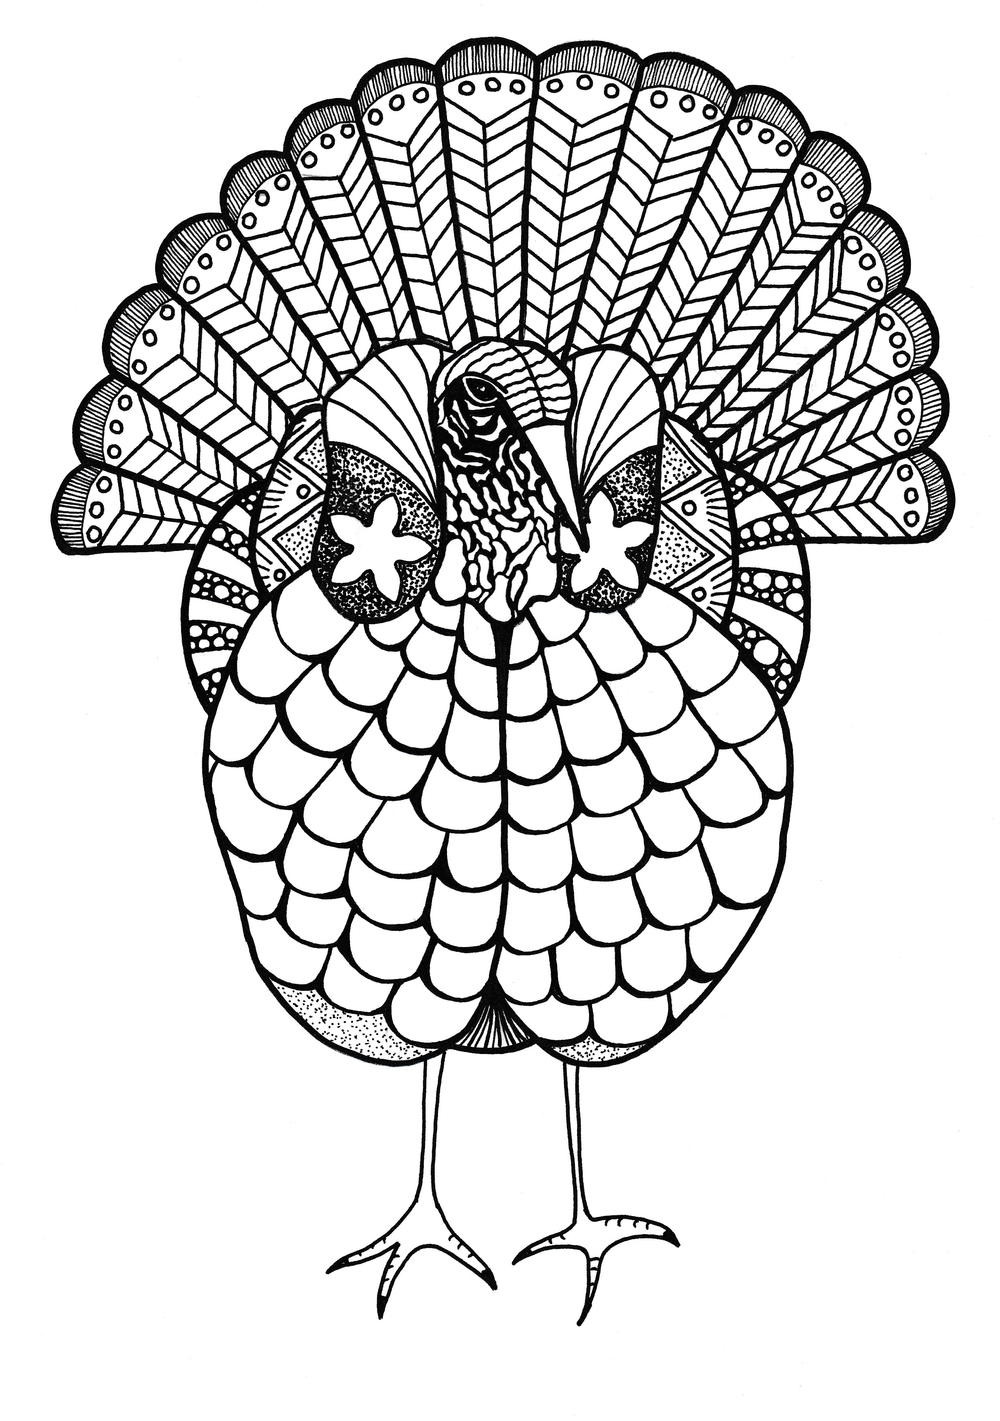 Adult Coloring Book Images
 Colorful Turkey Adult Coloring Page